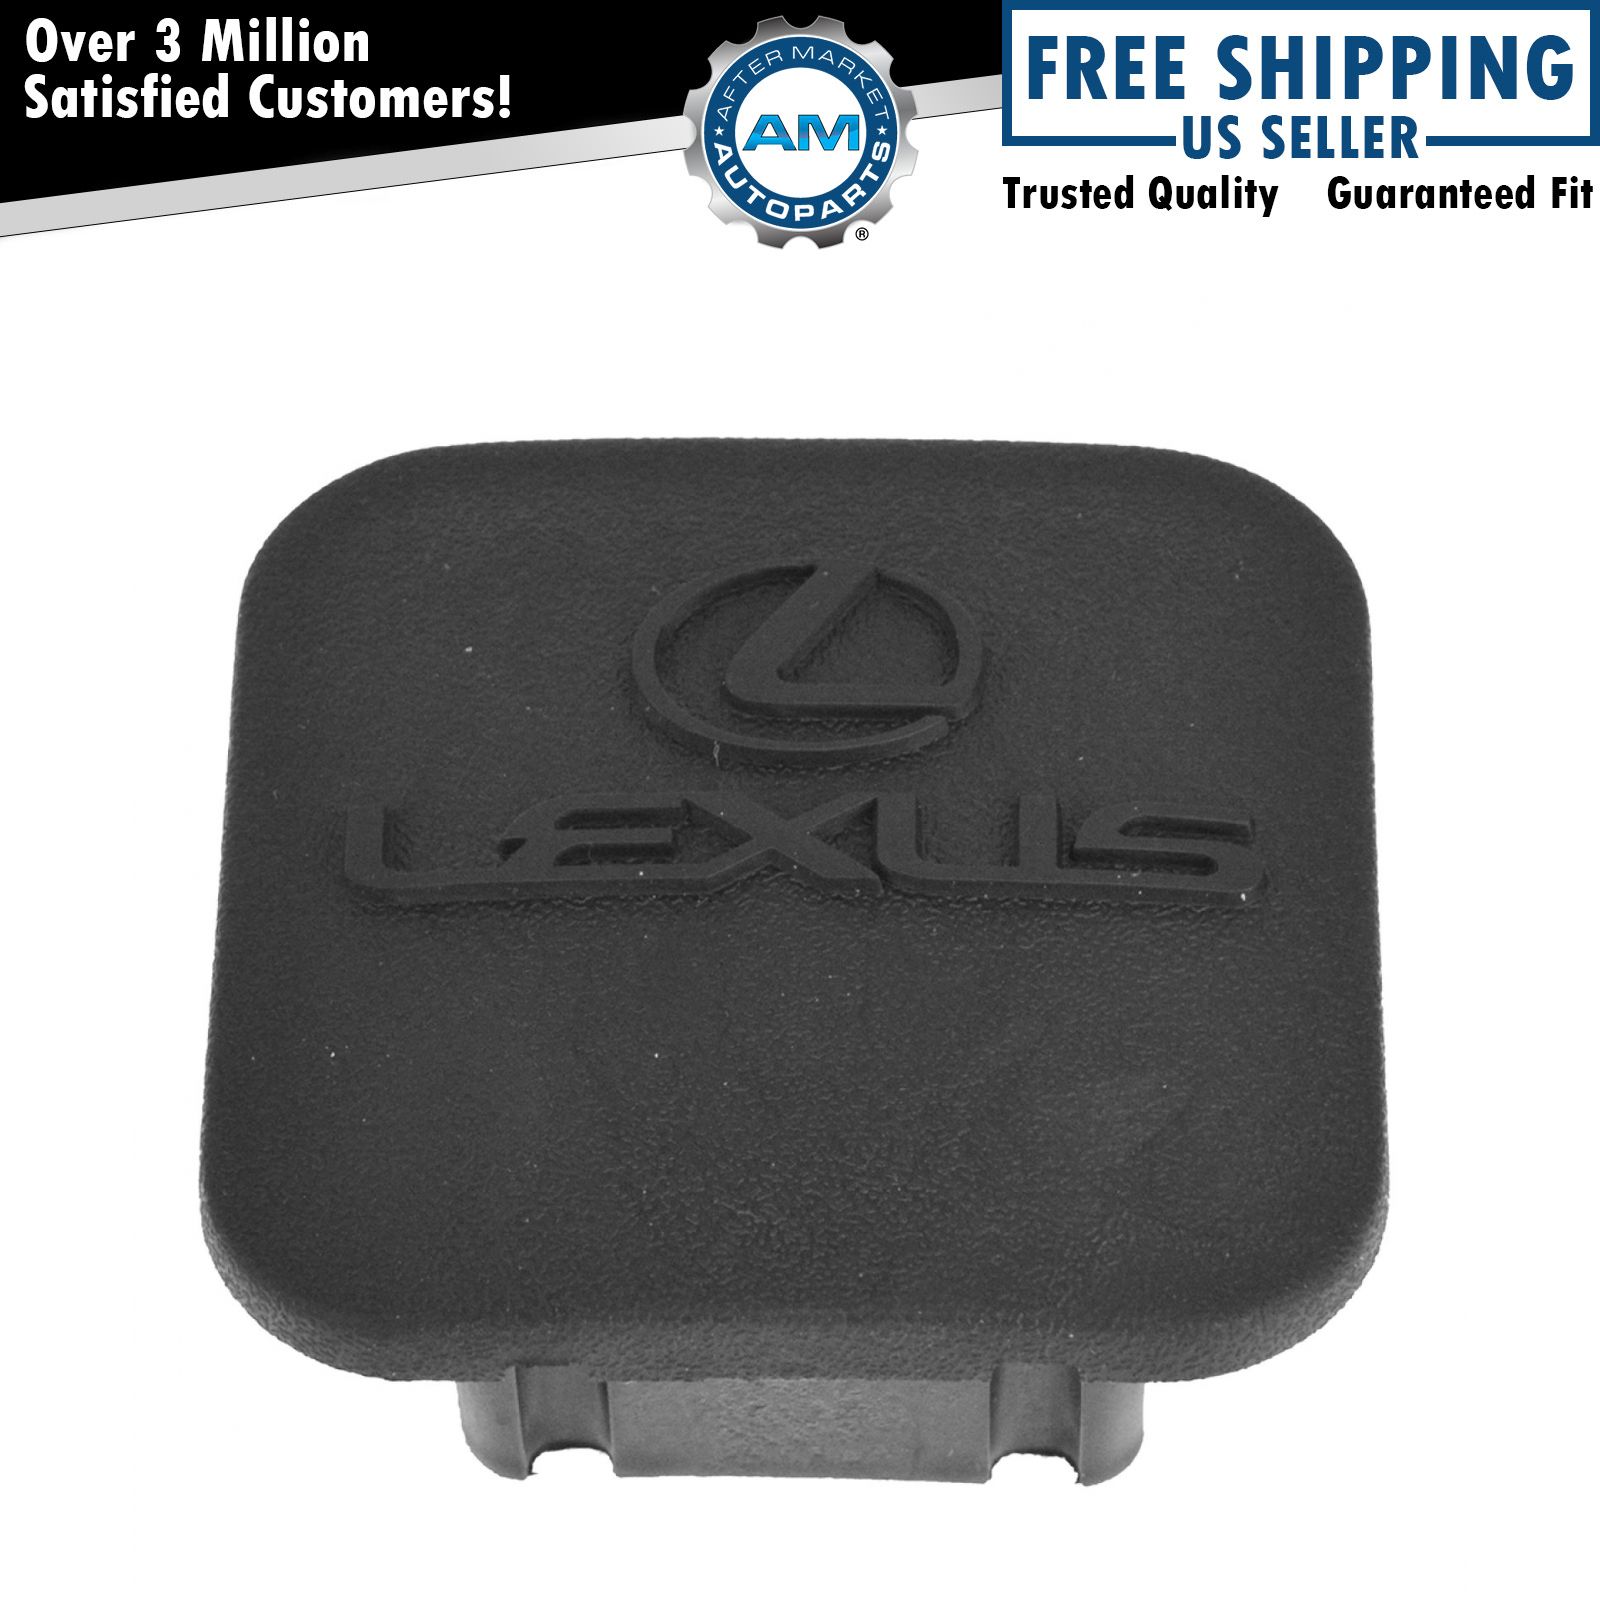 OEM 00228-60966 Trailer Tow Hitch Receiver Opening Cover Plug for Lexus New